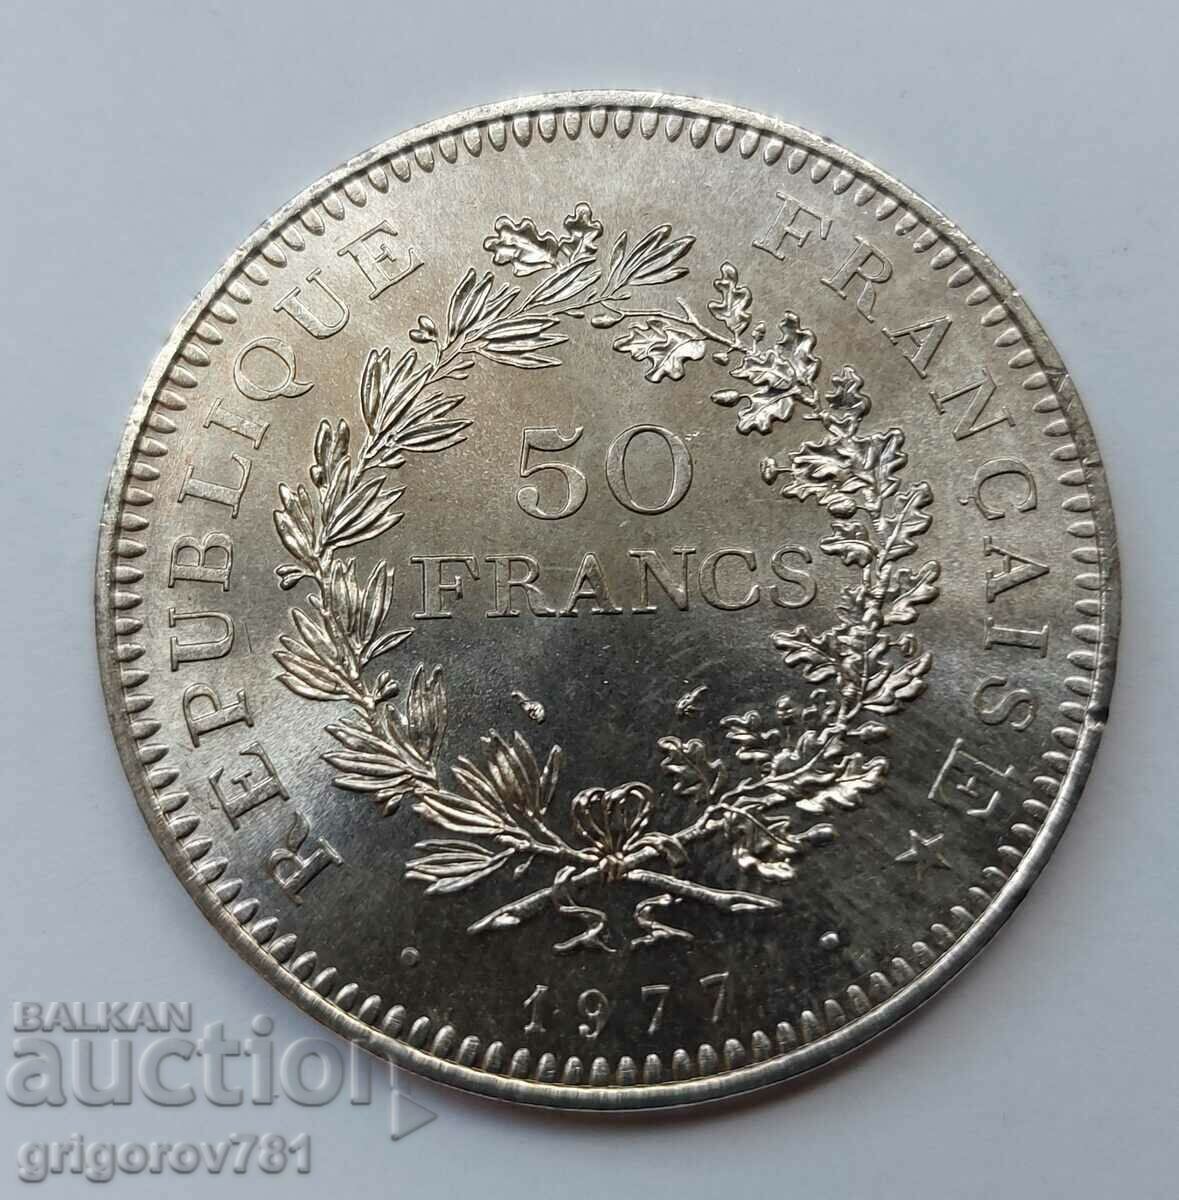 50 Francs Silver France 1977 - Silver Coin #47